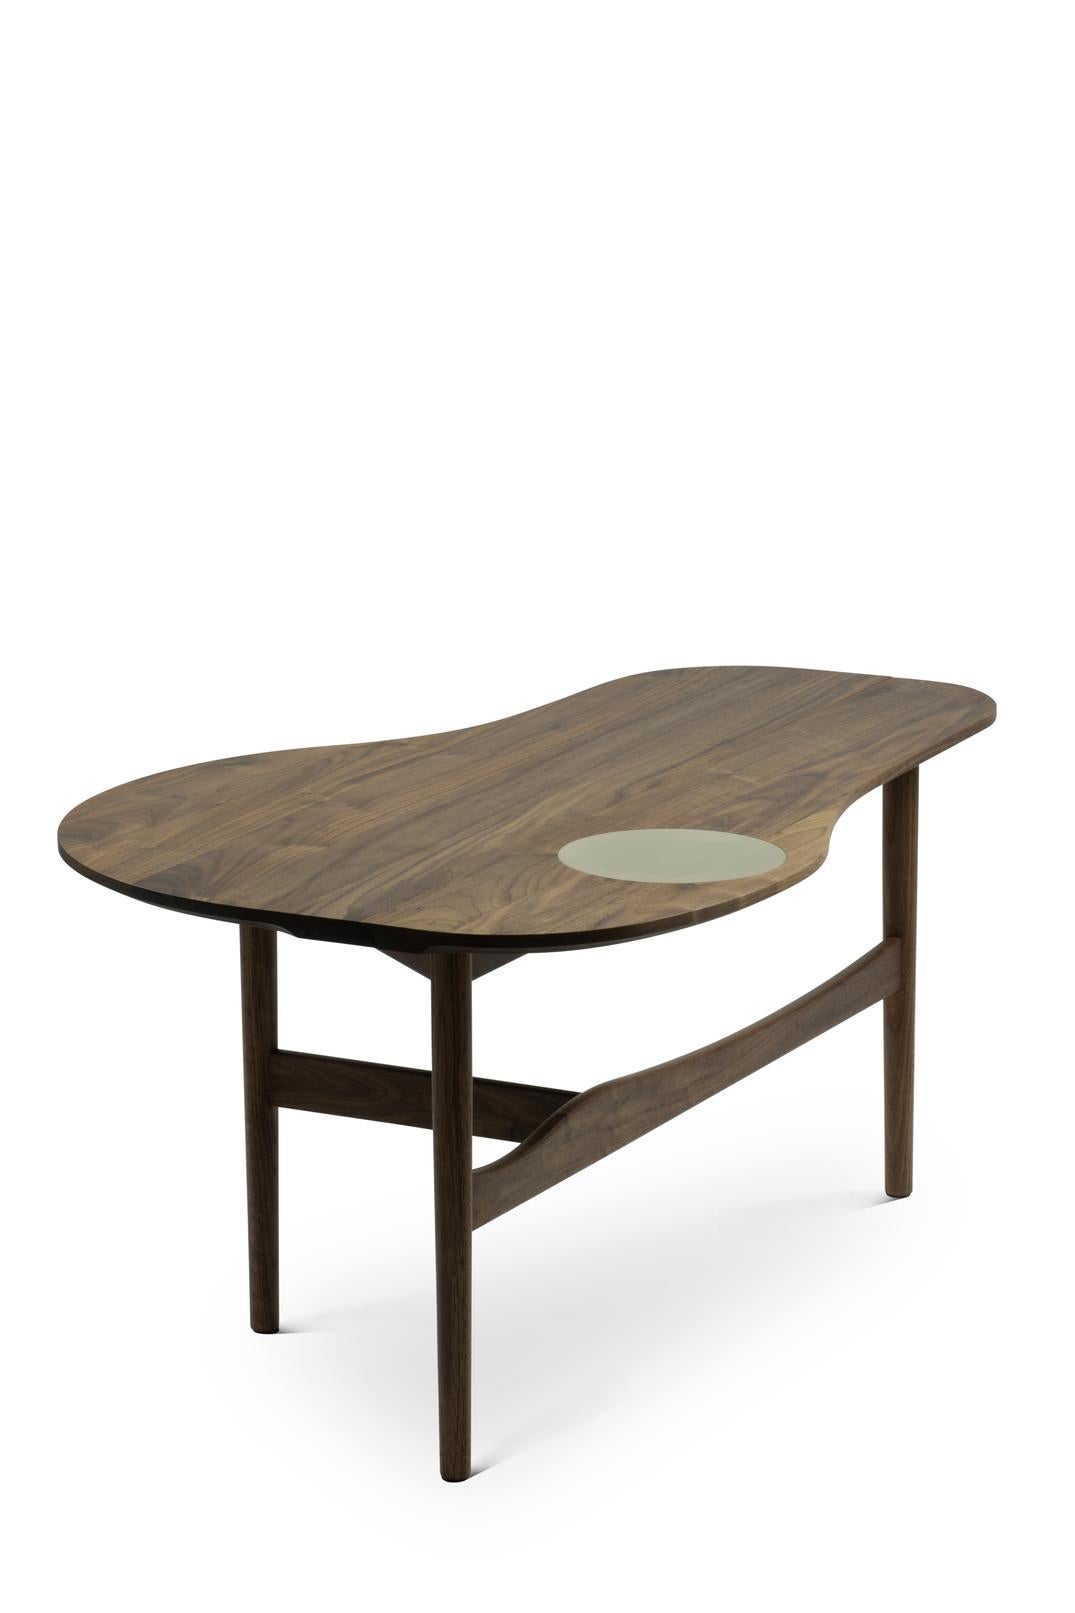 Table designed by Finn Juhl in 1949, relaunched in 2015.
Manufactured by House of Finn Juhl in Denmark.

The Butterfly Table, designed by Finn Juhl in 1949, is a very exclusive table. It was practically never produced at its time of creation. The